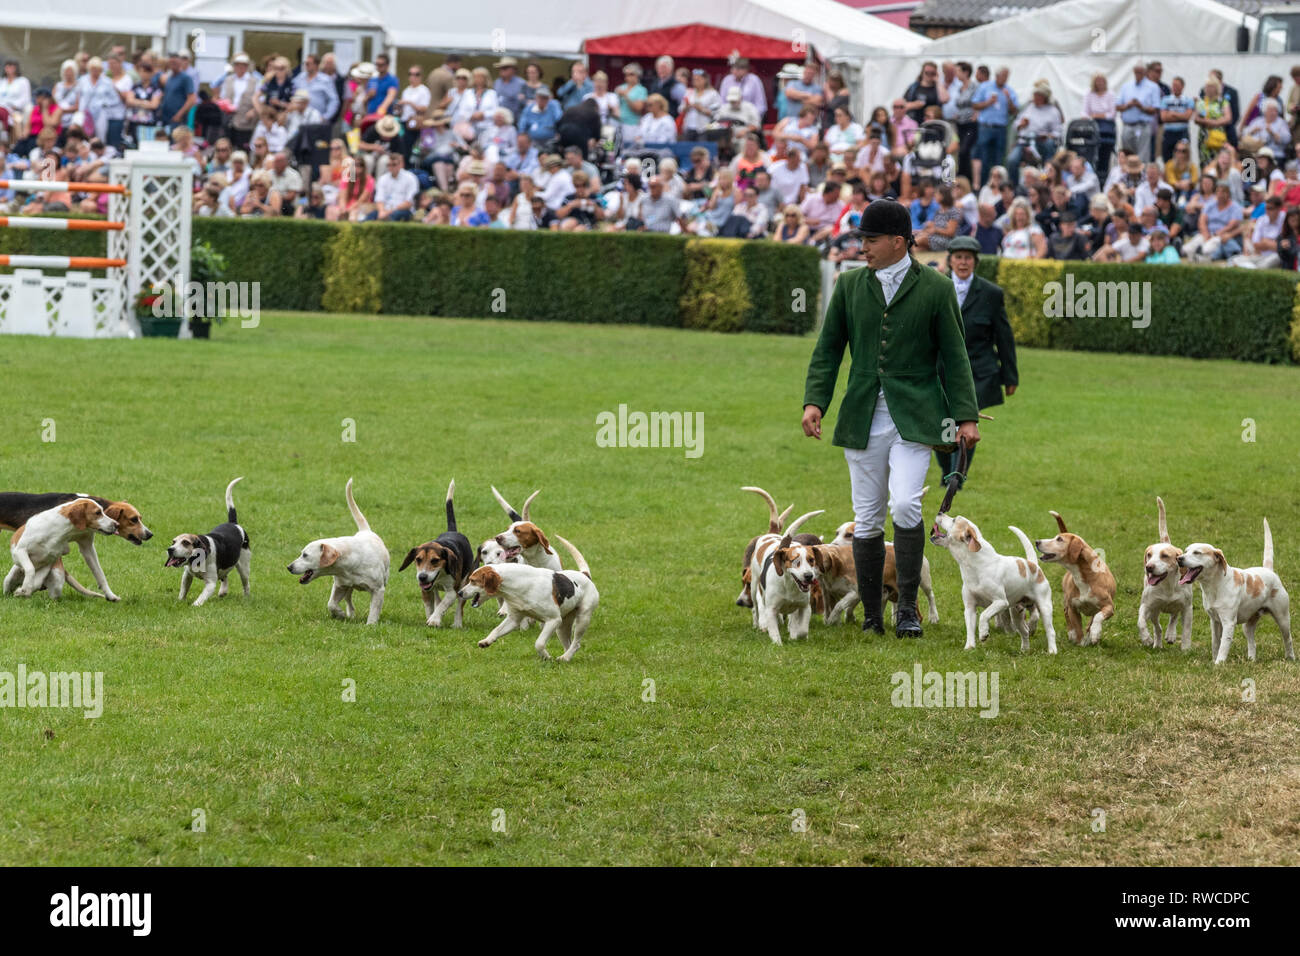 Harrogate, North Yorkshire, UK - July 12th, 2018: Hunt leaders led dozens of hounds into the main ring at the Great Yorkshire Show on 12th July 2018 a Stock Photo